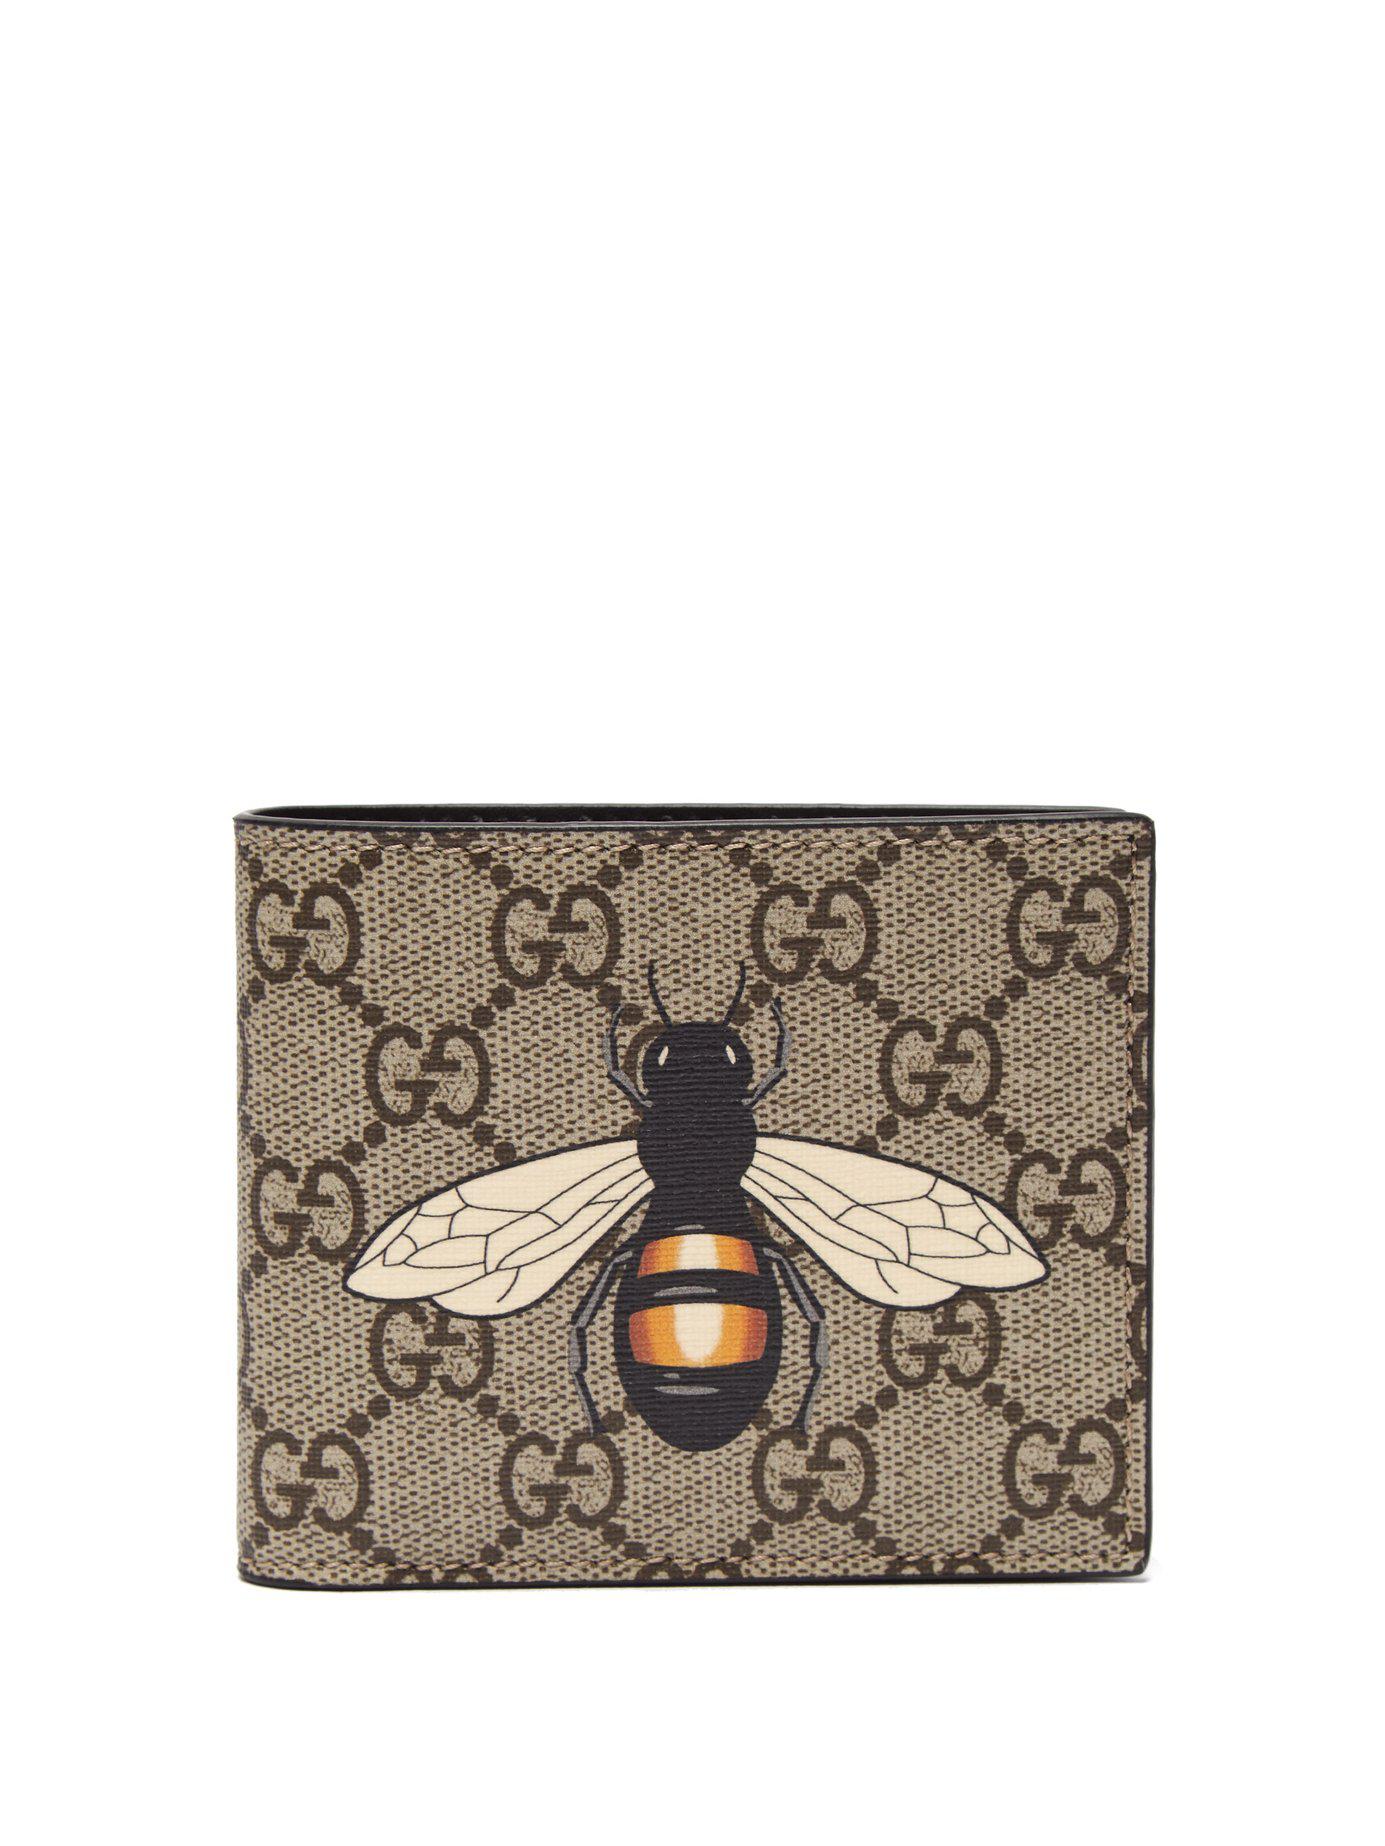 Lyst - Gucci Gg Supreme Bee Print Bi Fold Wallet in Brown for Men - Save 12.037037037037038%